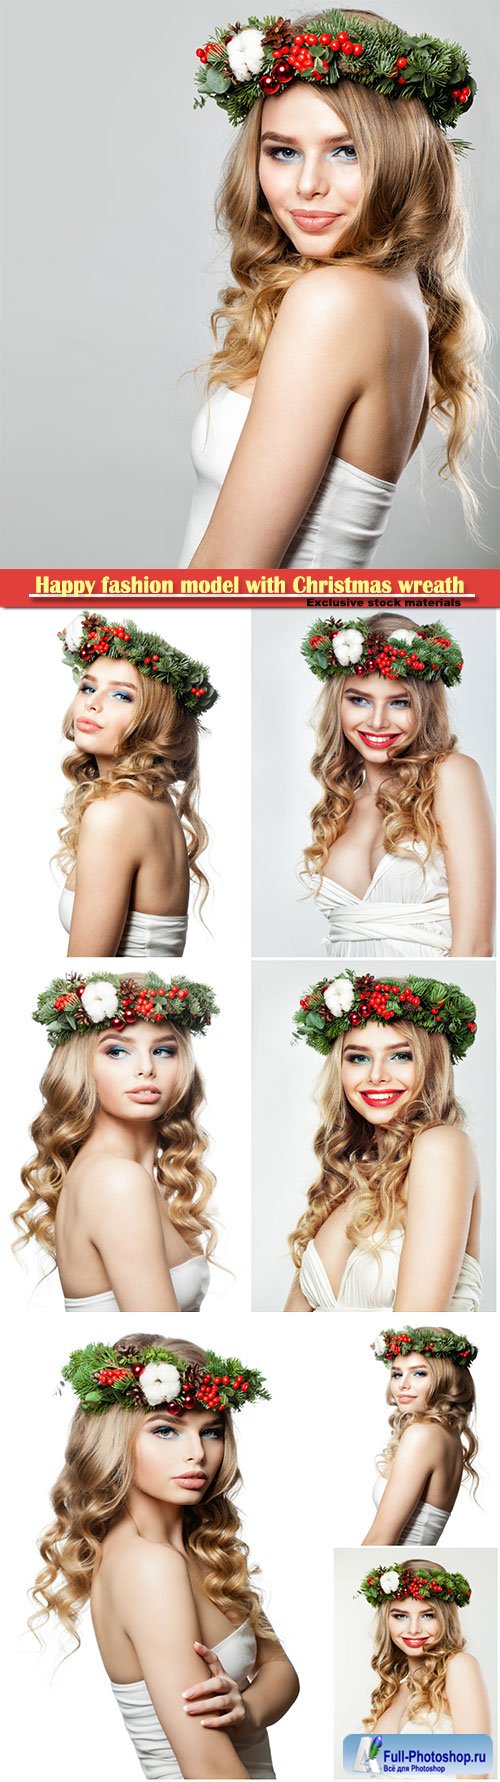 Happy fashion model with Christmas or New Year wreath